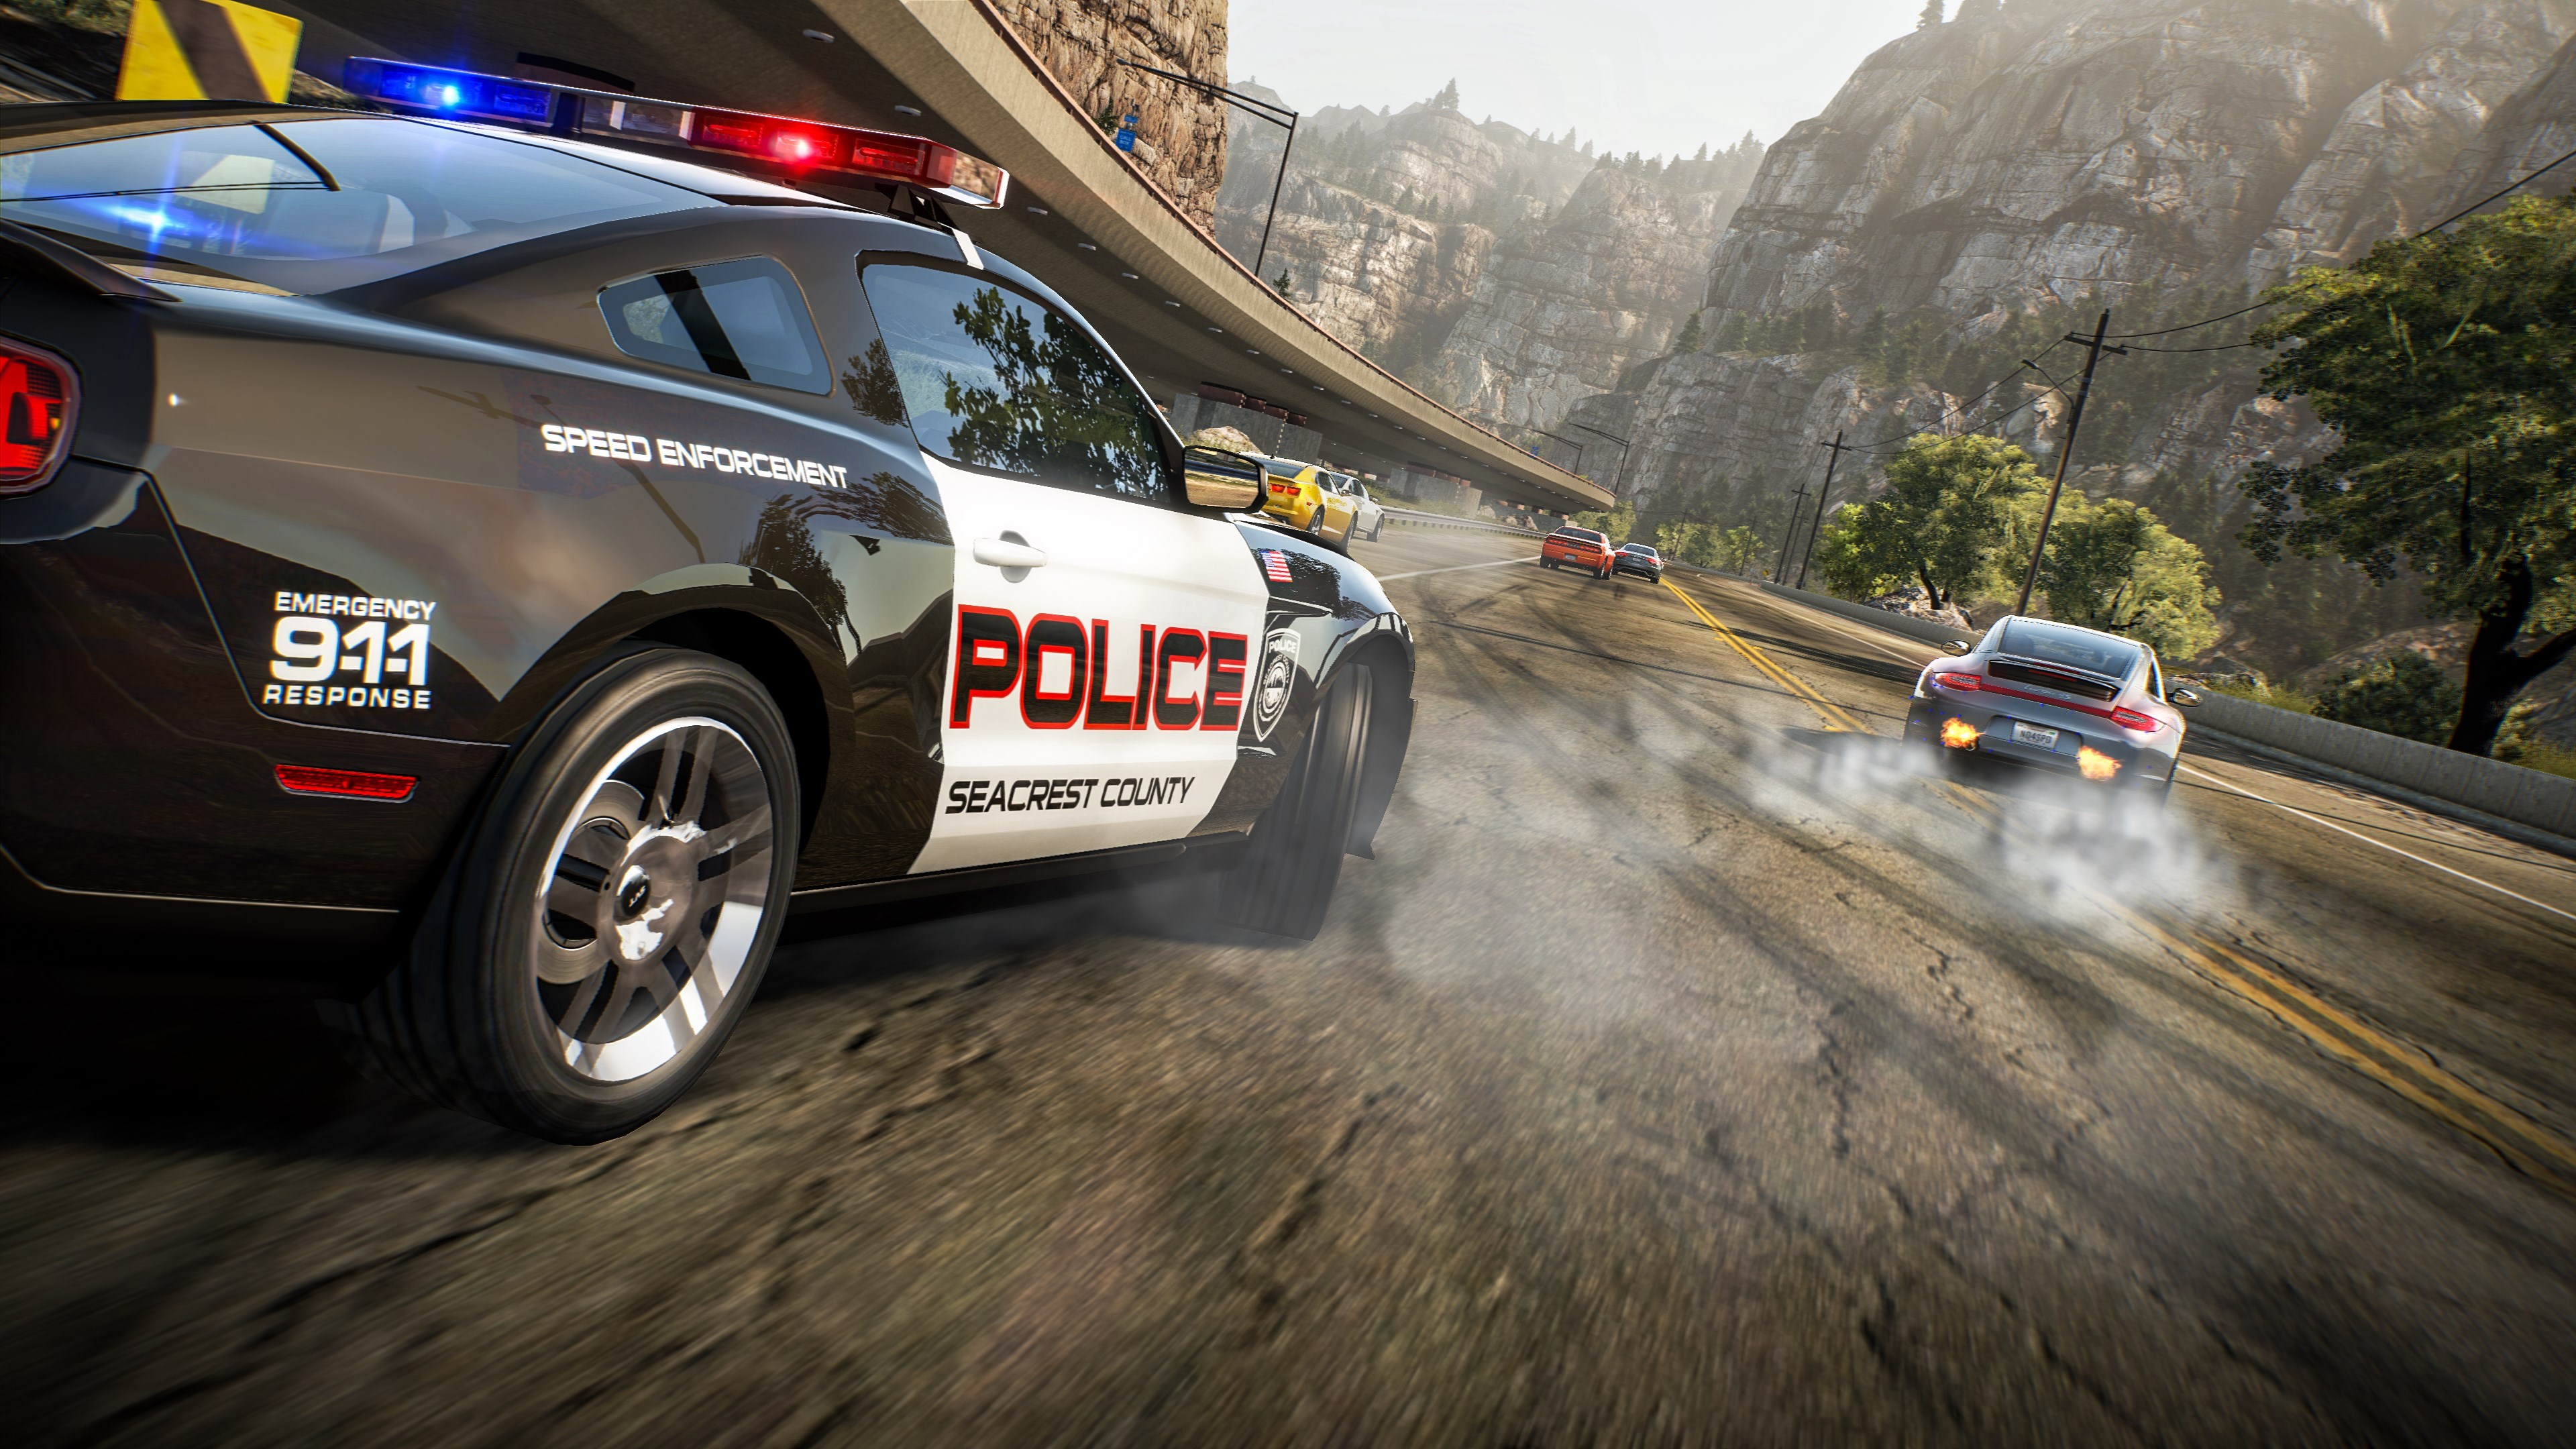 Hot pursuit nintendo. Need for Speed hot Pursuit Remastered 2020. Need for Speed: hot Pursuit (2010). NFS hot Pursuit 2010 Remastered. Need for Speed hot Pursuit Remastered Xbox one.